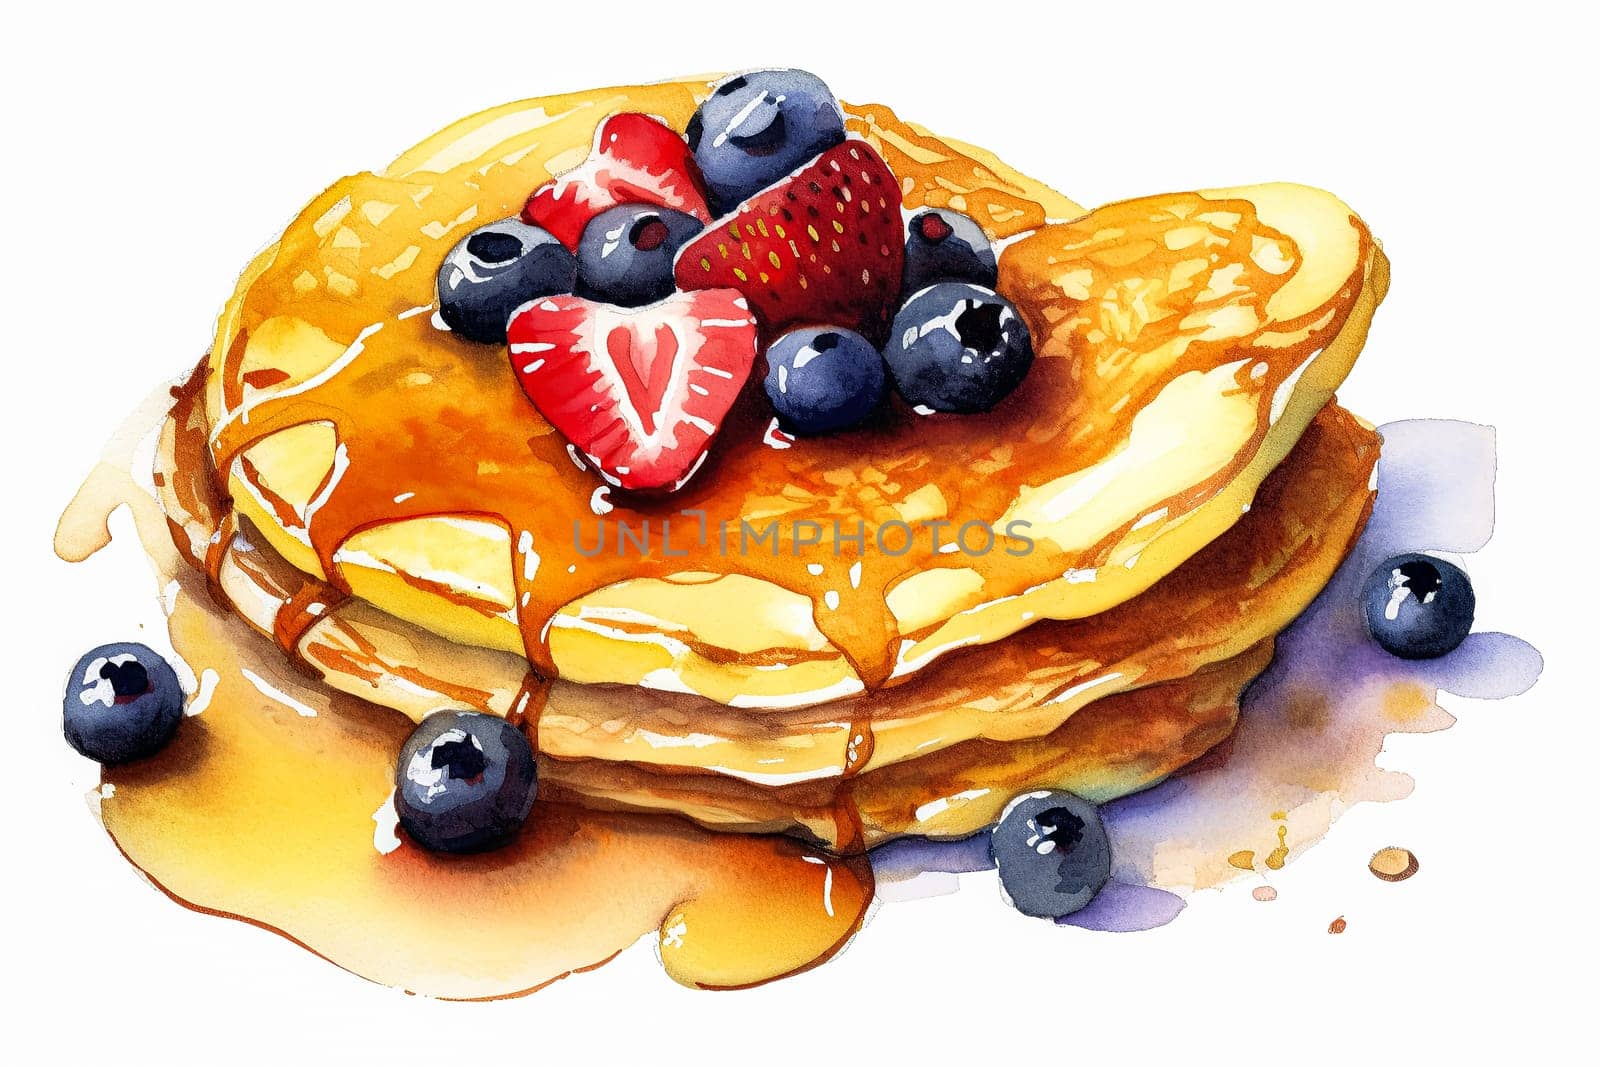 A stack of pancakes with blueberries and strawberries on top. The pancakes are drizzled with syrup and the fruit is fresh and colorful. Concept of indulgence and enjoyment